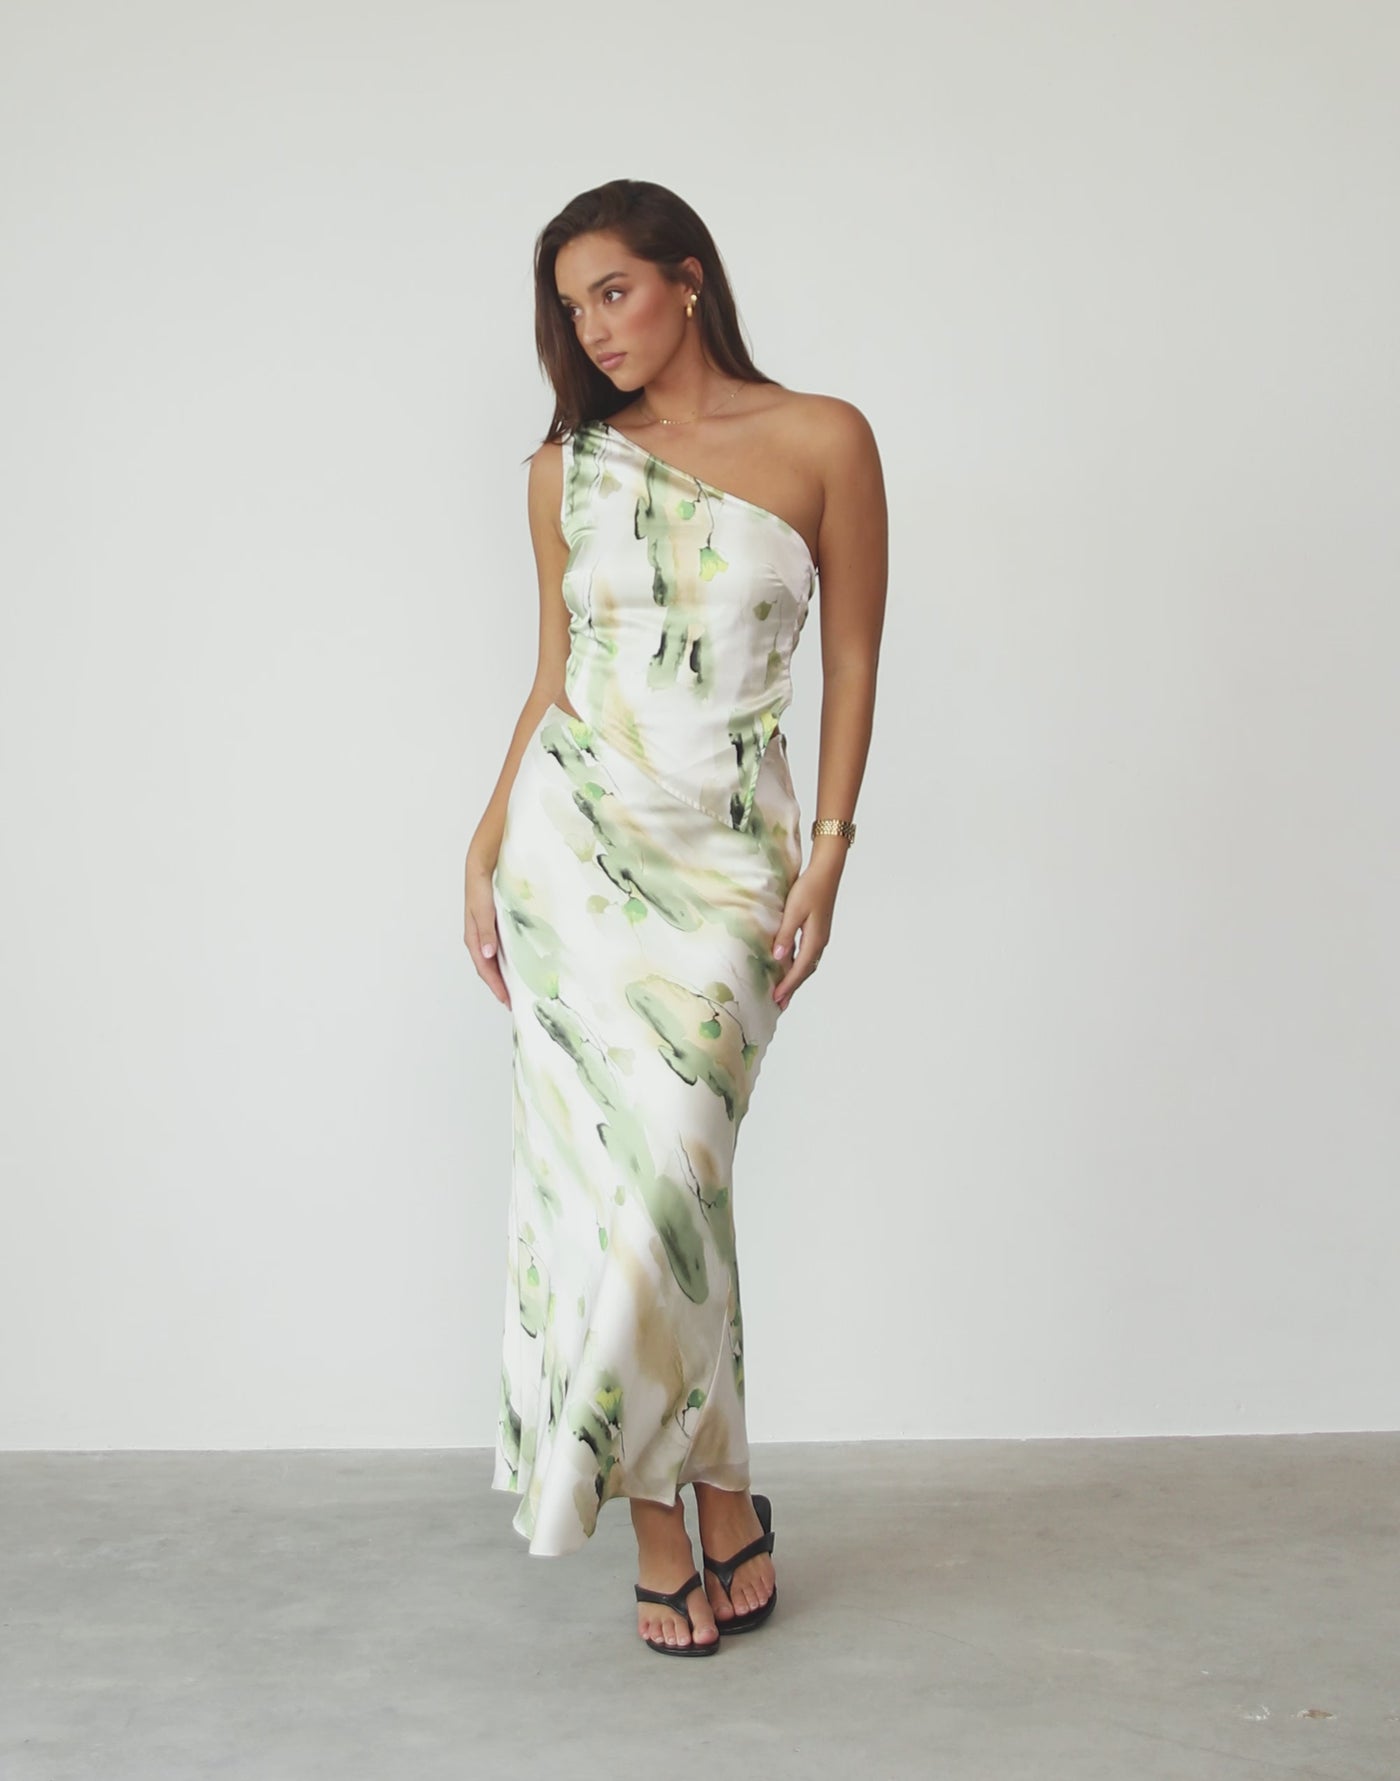 Adoette One Shoulder Top (Water Lily)